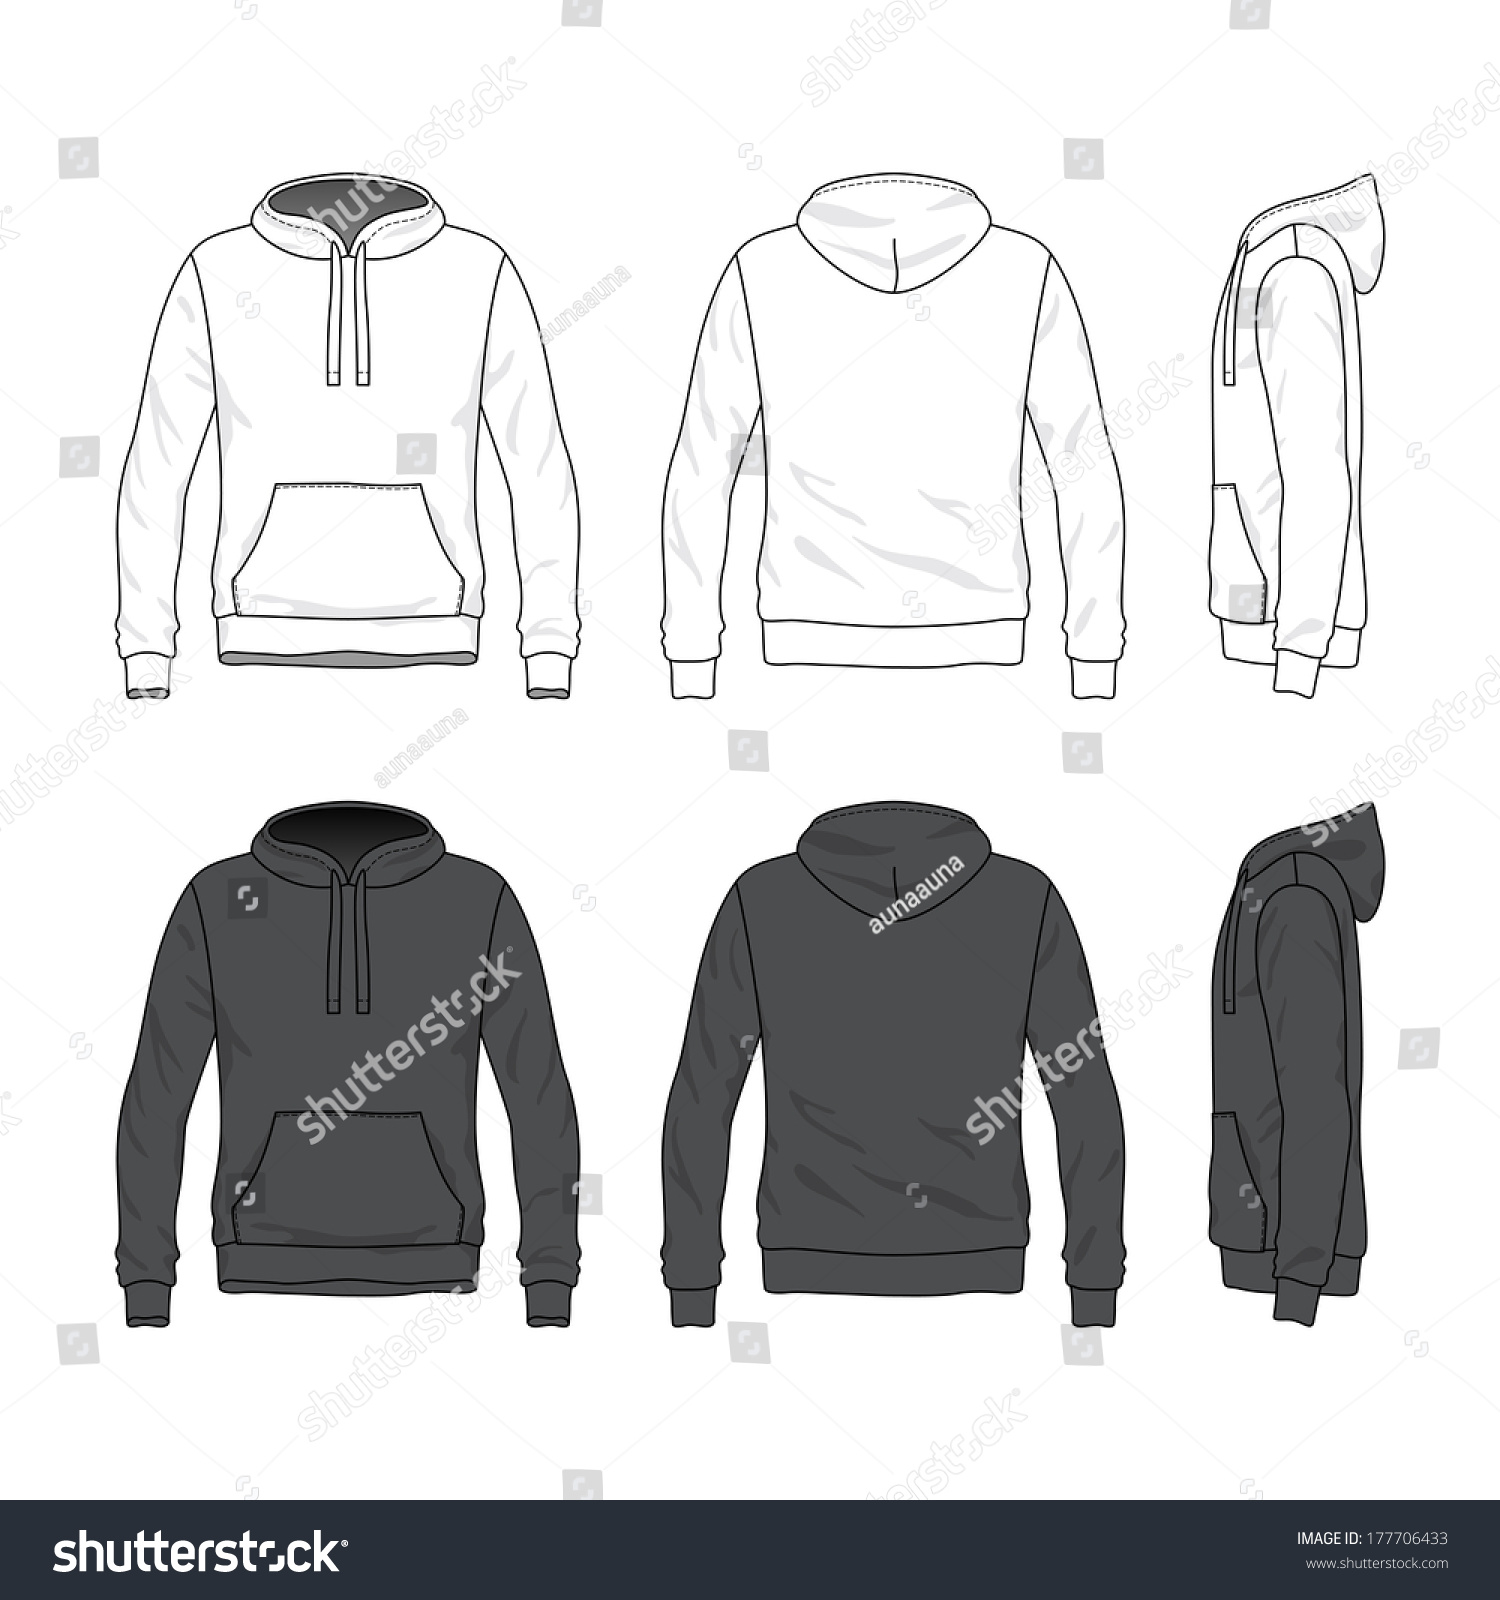 Blank Men'S Hoodie In Front, Back And Side Views. Vector Illustration ...